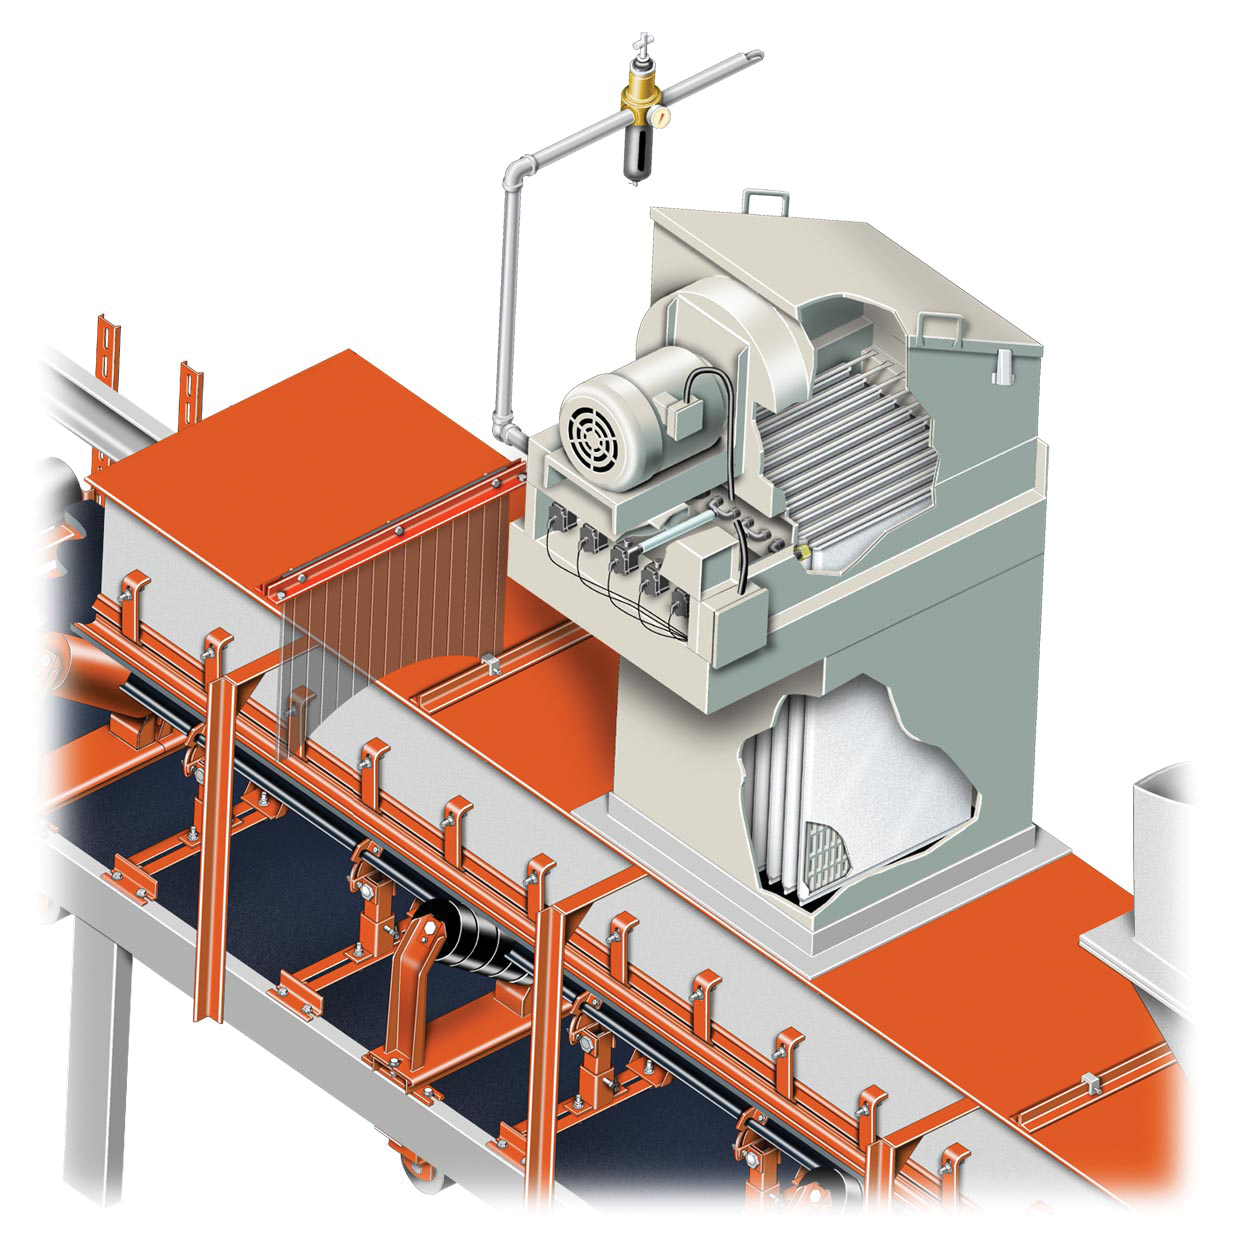 An illustration shows cutaway views of the insertable dust collector to better show how it works.